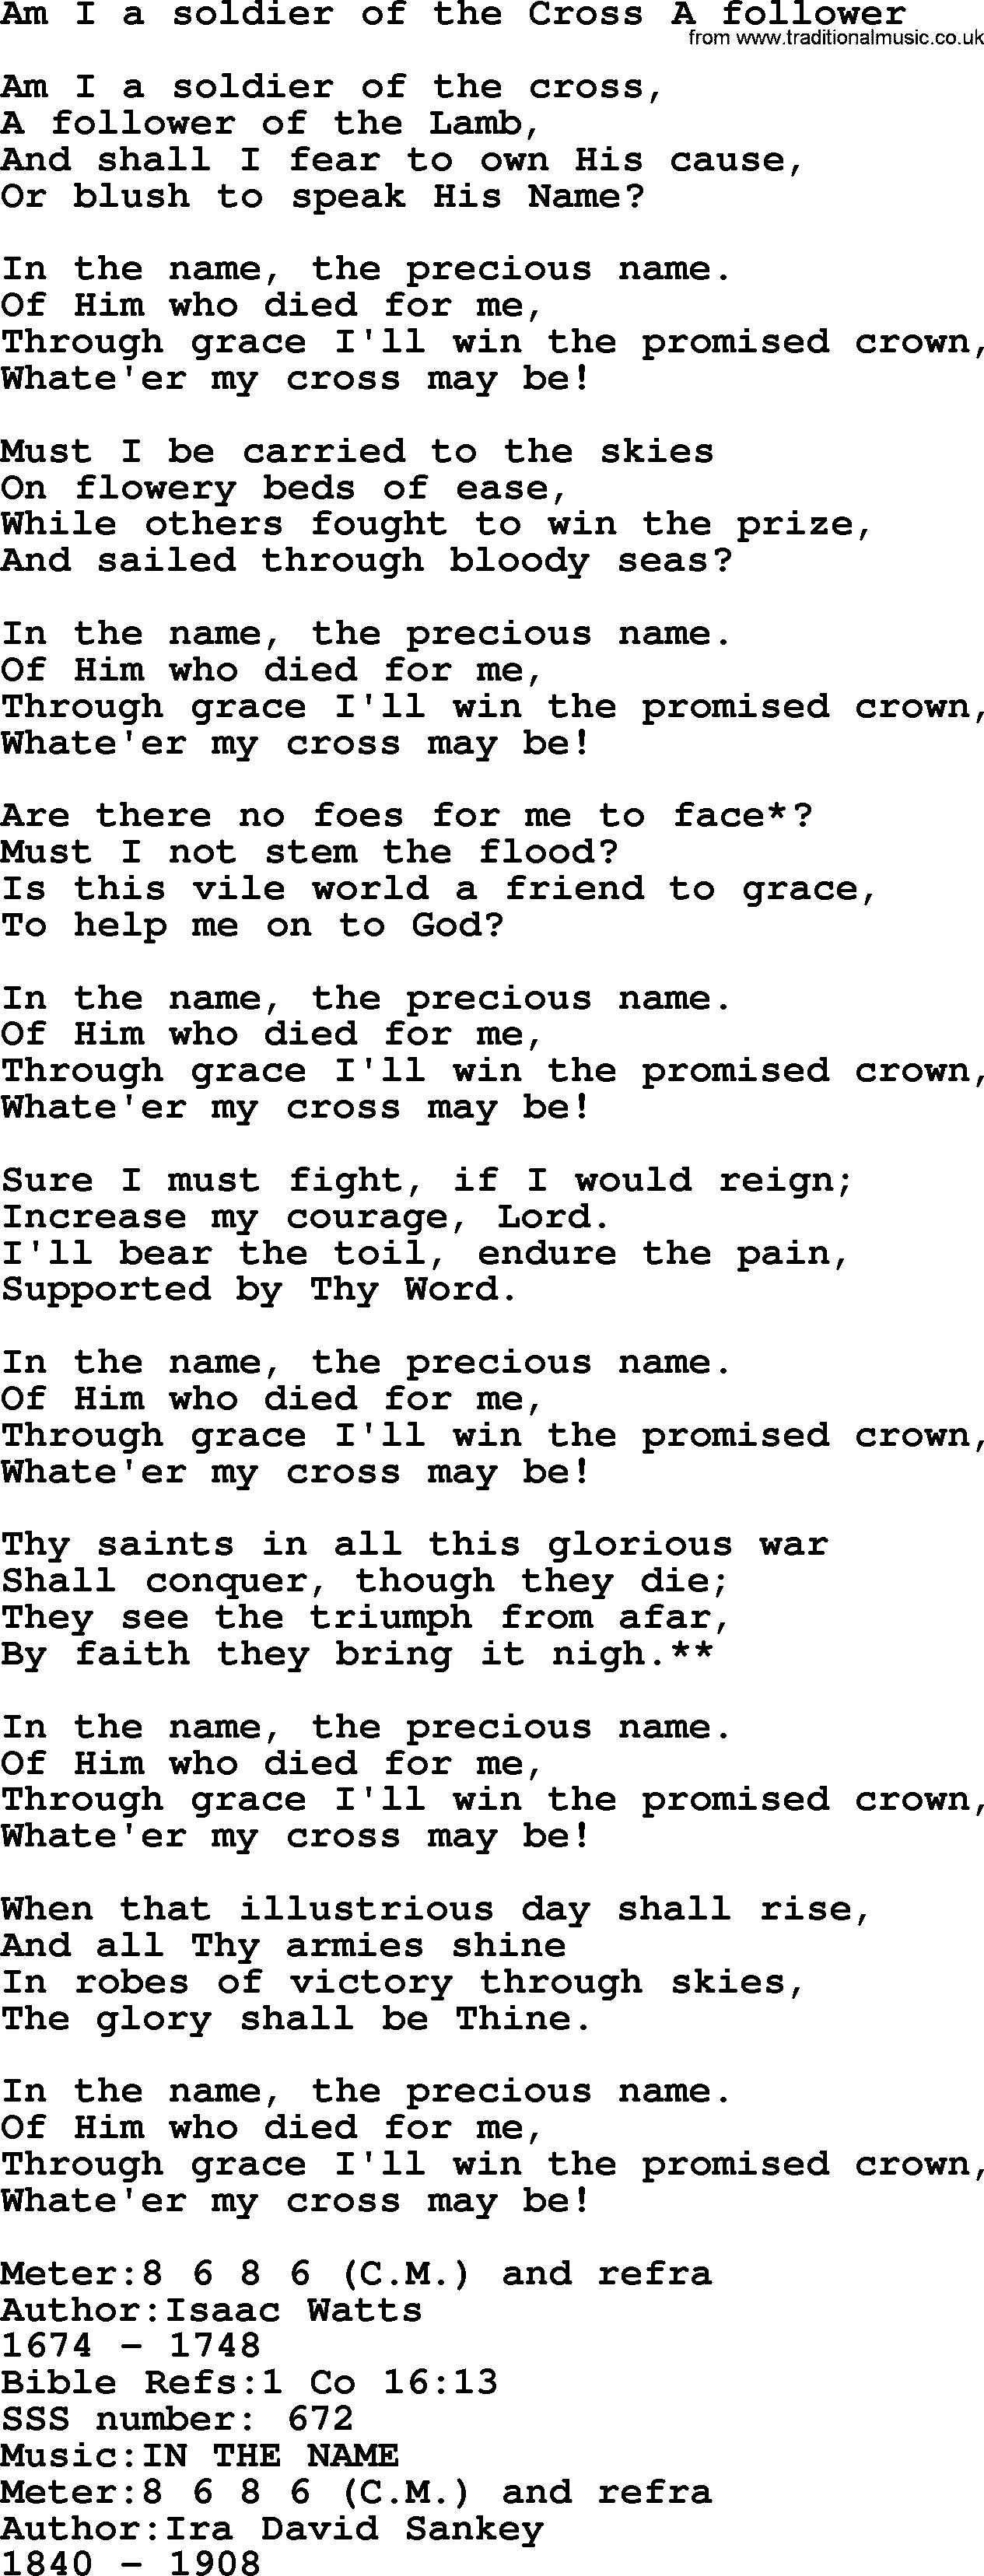 Sacred Songs and Solos complete, 1200 Hymns, title: Am I A Soldier Of The Cross A Follower, lyrics and PDF